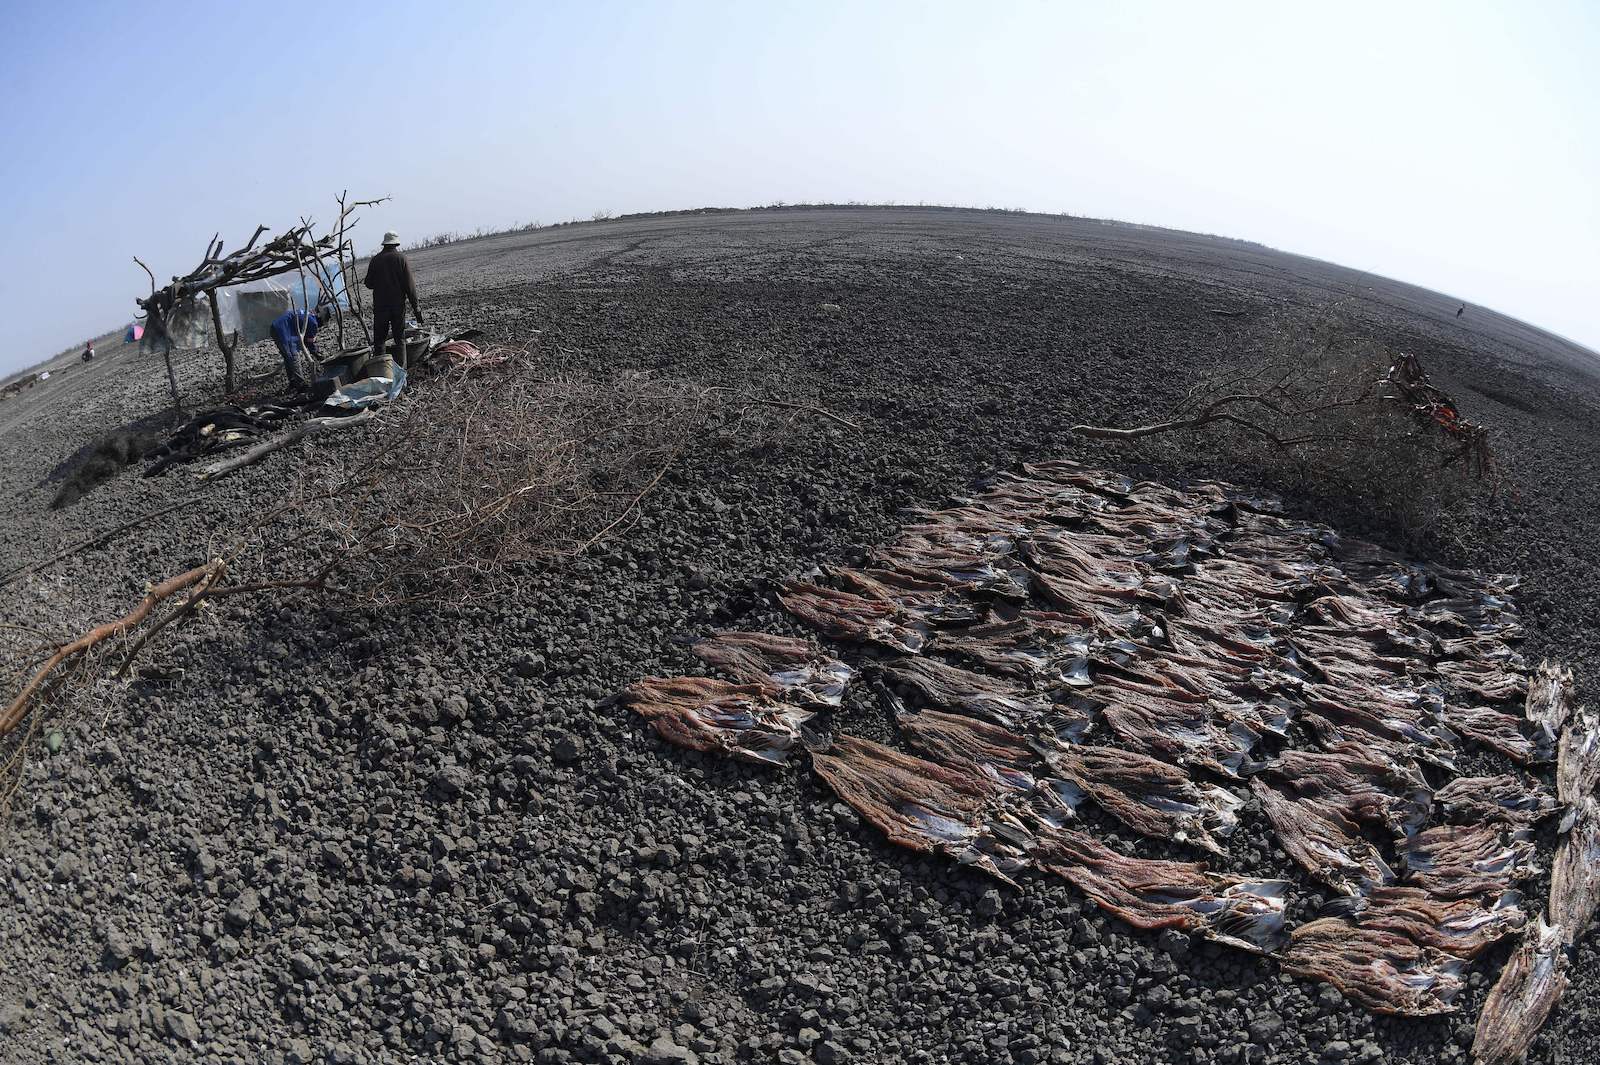 dried fish lay on a rocky area with people standing nearby